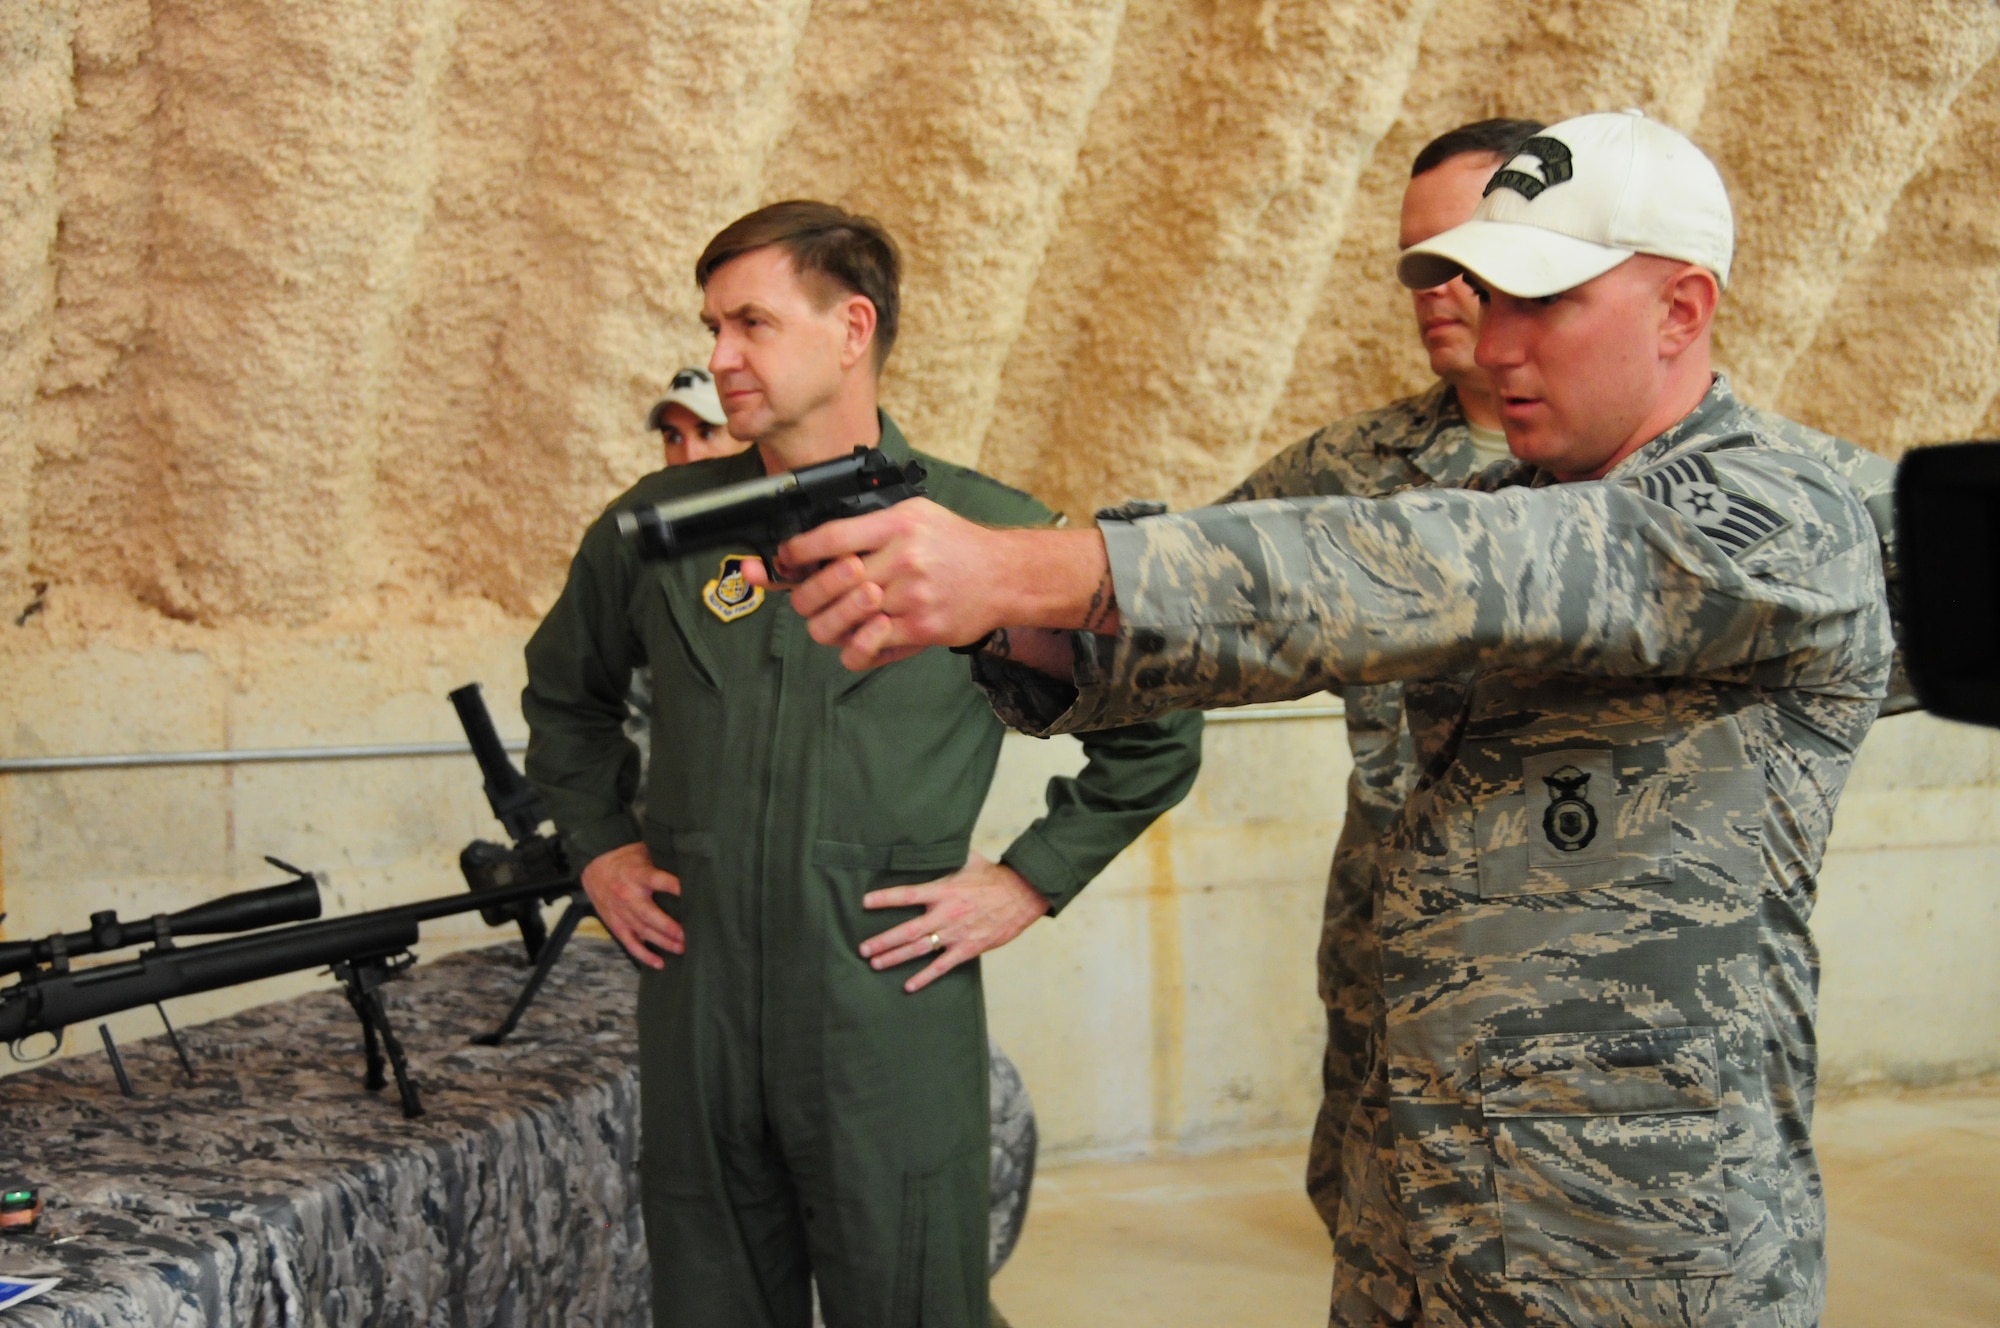 Tech Sgt. Michael Dugan, 736th Security Forces Squadron, fires a 9 millimeter Beretta with simulated rounds for Lt. Gen. Stephen Hoog, U.S. Air Force Alaskan Command and 11th Air Force commander, demonstrating different techniques to control a suspect at Northwest Field, Guam, Feb. 1. During his trip here, General Hoog visited with the 736th Security Forces Squadron, 36th Mobility Response Squadron, 36th Medical Group and several other squadrons from Andersen, and got a first-hand look at what Andersen Airmen bring to the fight within U.S. Pacific Command area of responsibility. (US Air Force photo by Senior Airman Robert Hicks/Released)